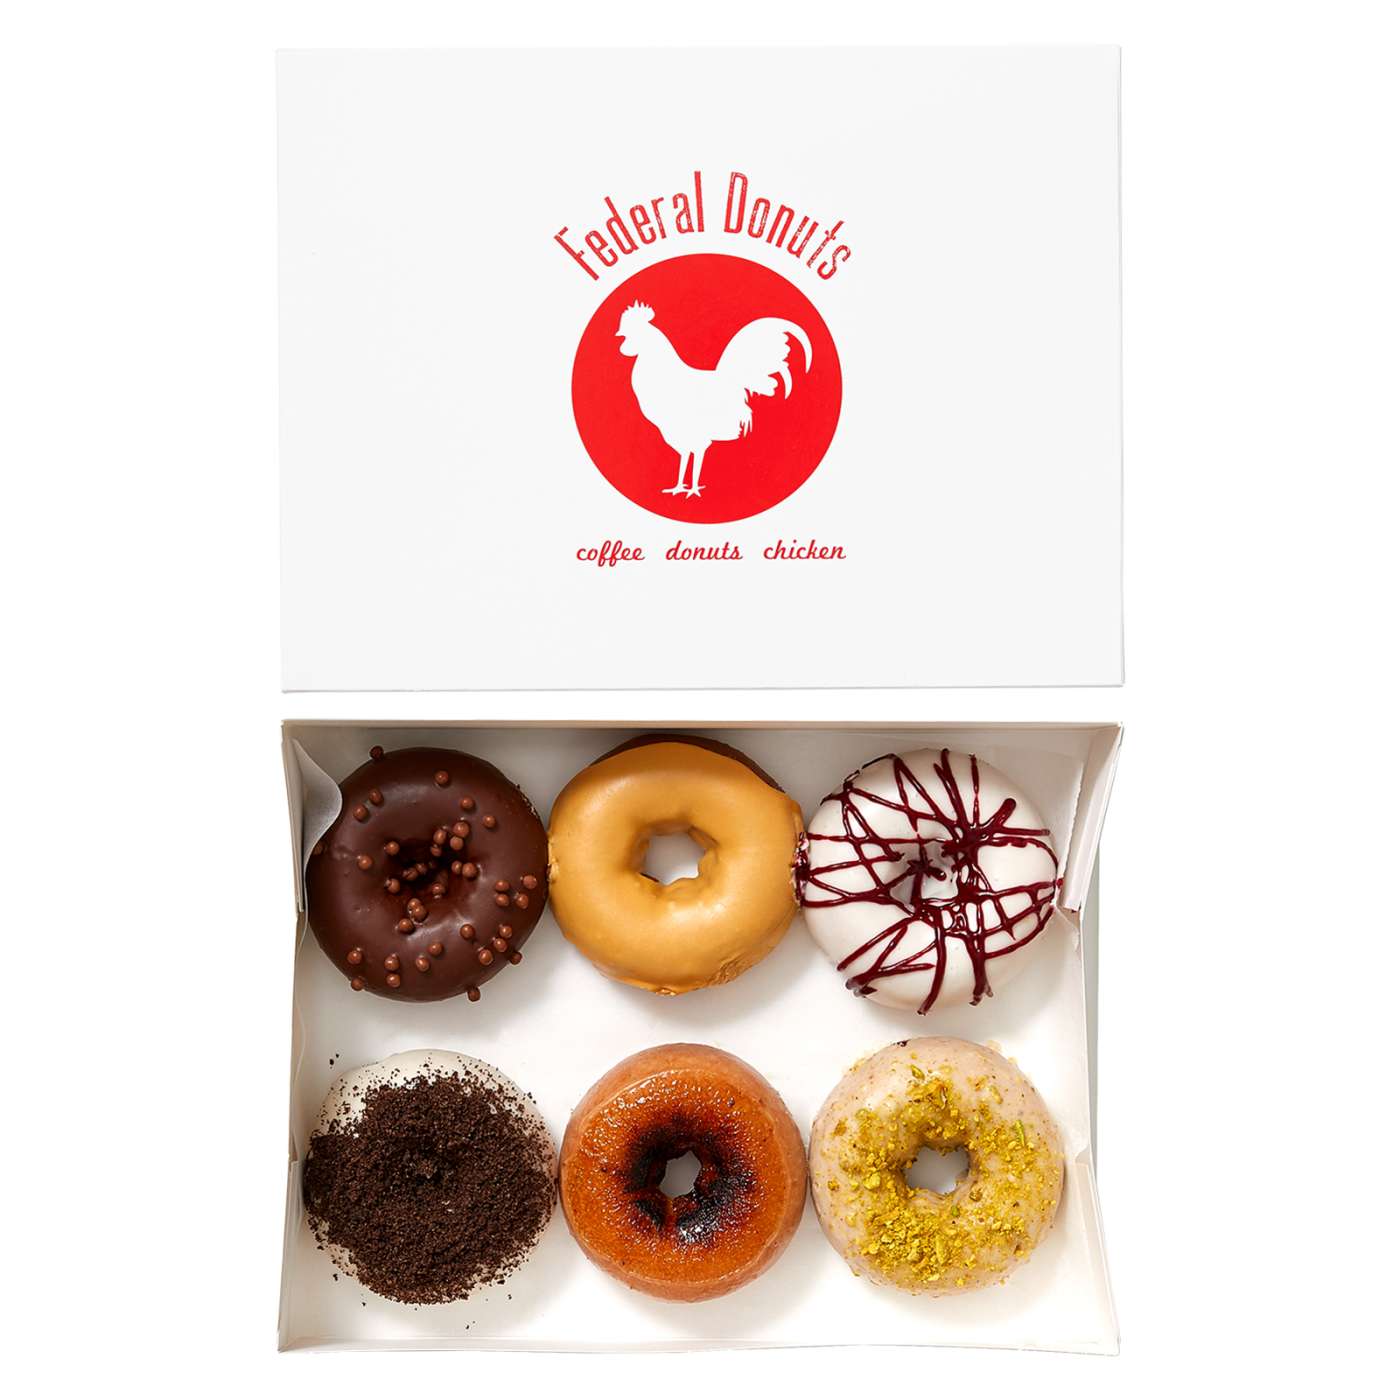 Federal Donuts variety box of 6 fancy donuts